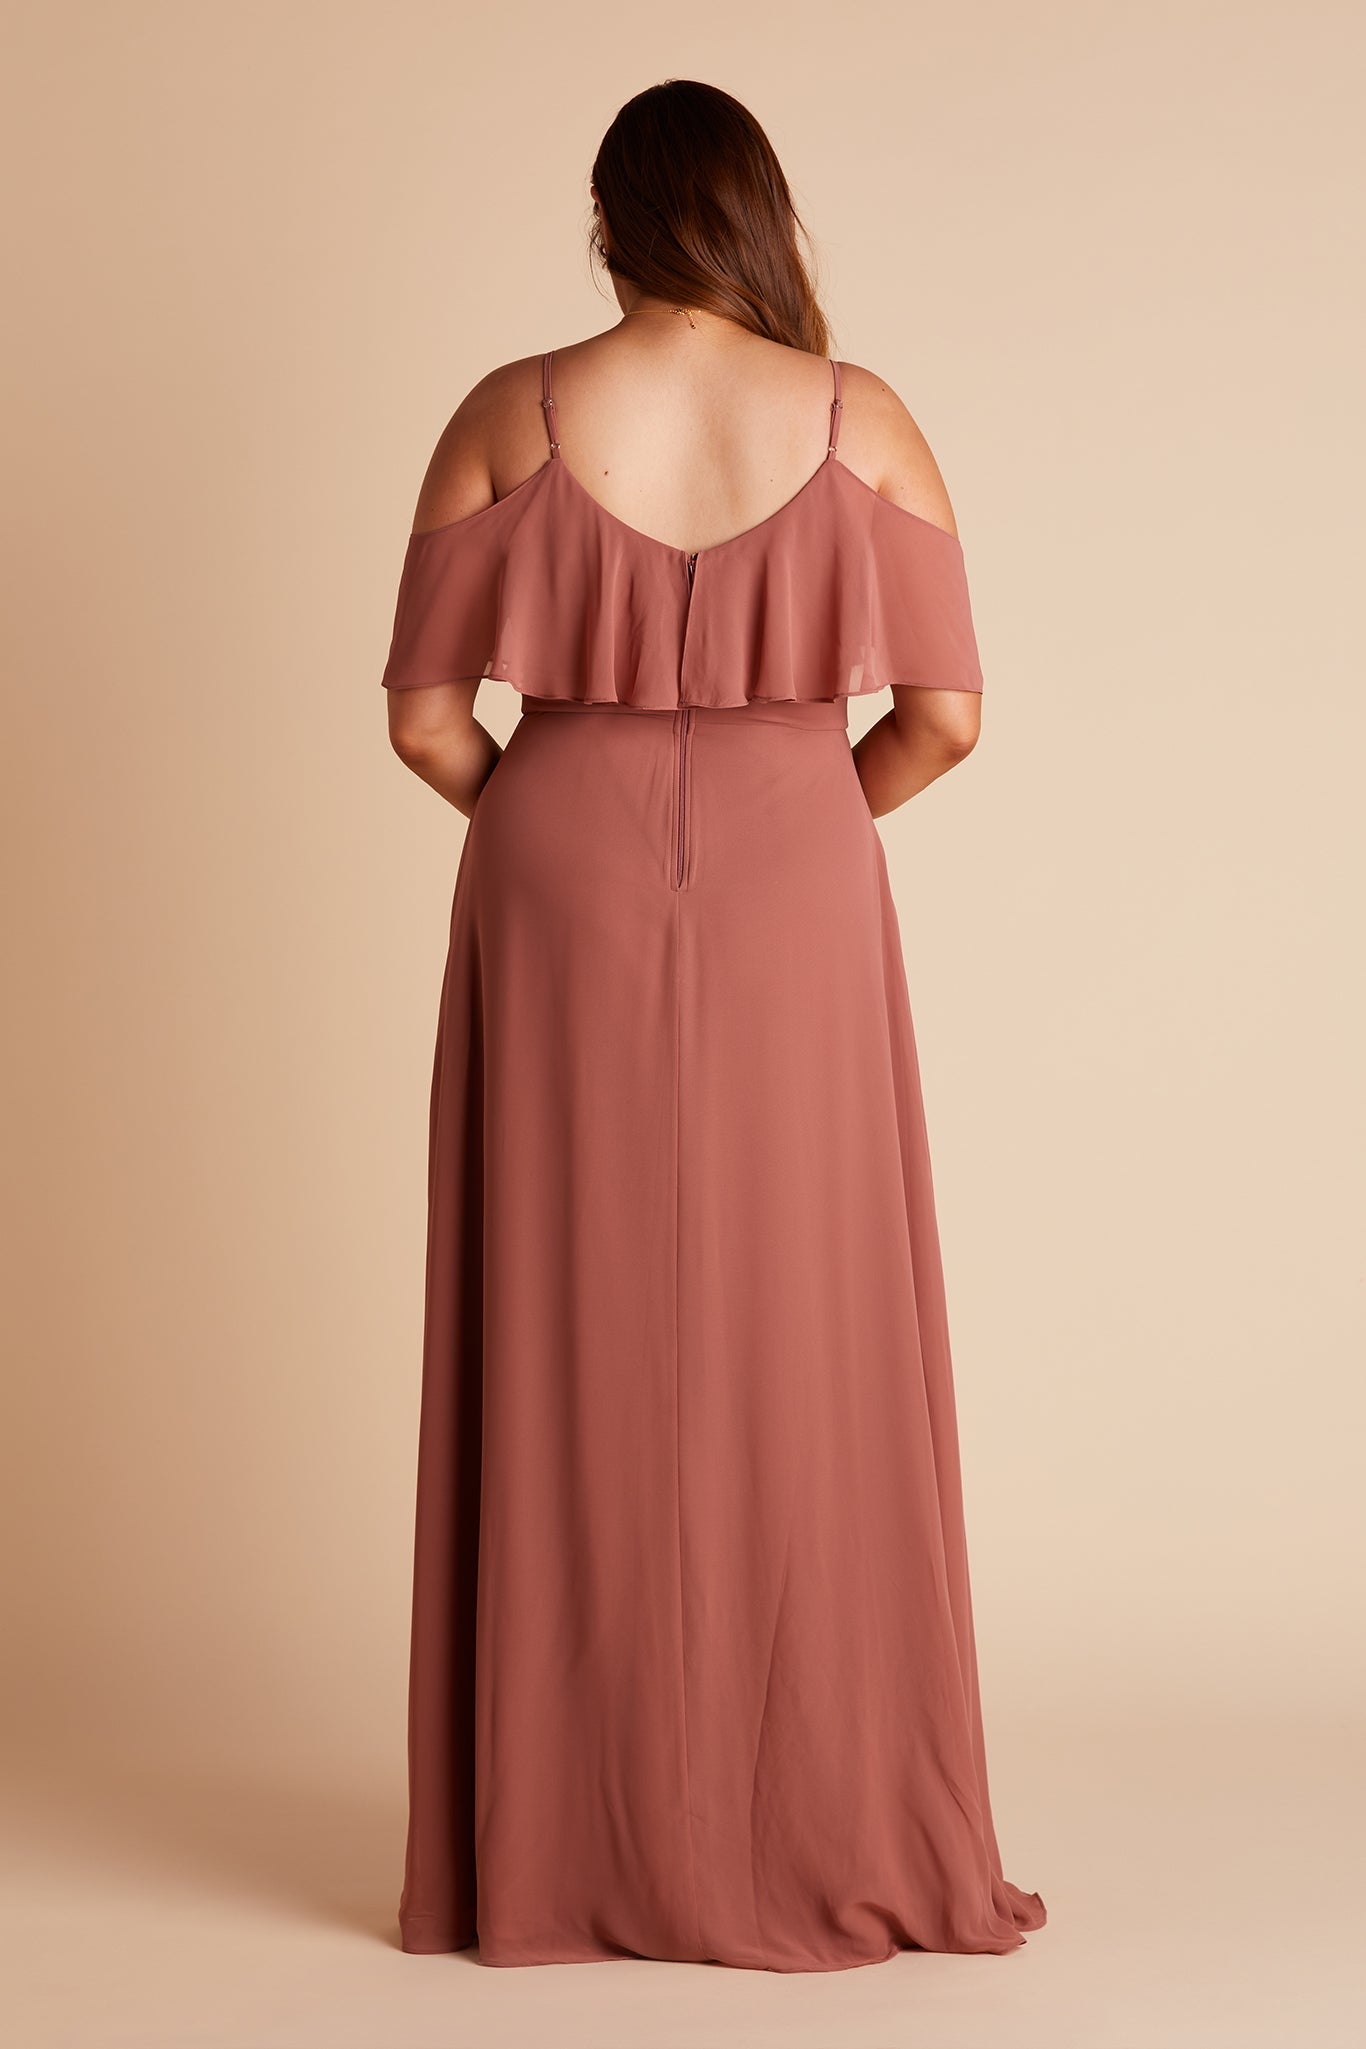 Jane convertible plus size bridesmaid dress with slit in desert rose chiffon by Birdy Grey, back view